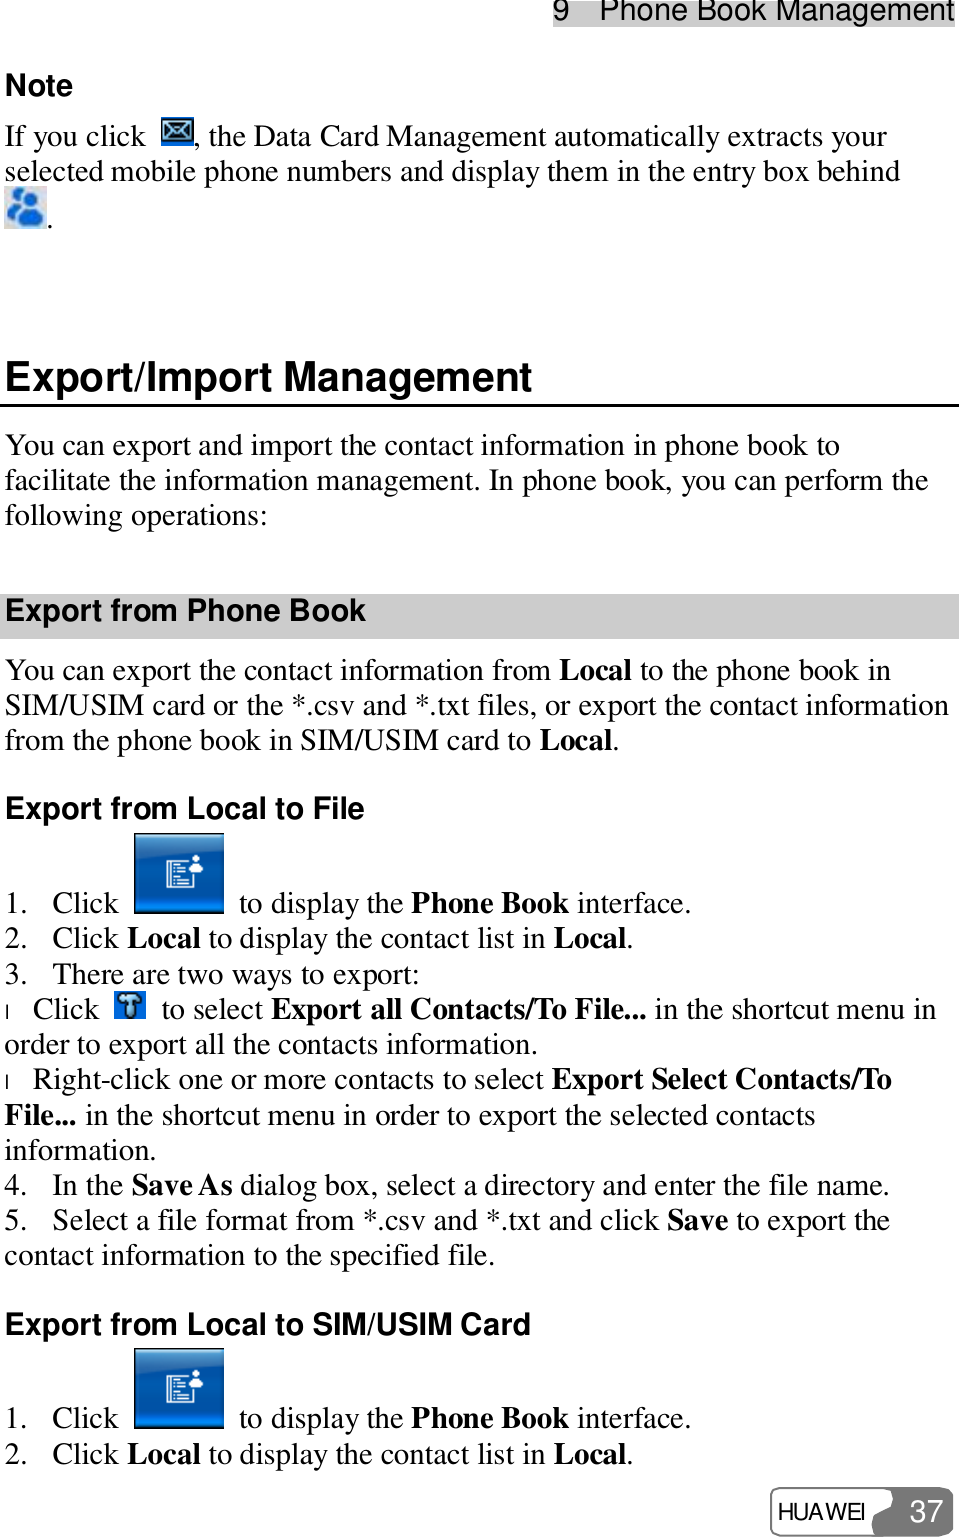 9  Phone Book Management HUAWEI  37 Note If you click  , the Data Card Management automatically extracts your selected mobile phone numbers and display them in the entry box behind .  Export/Import Management You can export and import the contact information in phone book to facilitate the information management. In phone book, you can perform the following operations: Export from Phone Book You can export the contact information from Local to the phone book in SIM/USIM card or the *.csv and *.txt files, or export the contact information from the phone book in SIM/USIM card to Local. Export from Local to File 1. Click   to display the Phone Book interface. 2. Click Local to display the contact list in Local. 3. There are two ways to export: l Click   to select Export all Contacts/To File... in the shortcut menu in order to export all the contacts information. l Right-click one or more contacts to select Export Select Contacts/To File... in the shortcut menu in order to export the selected contacts information. 4. In the Save As dialog box, select a directory and enter the file name. 5. Select a file format from *.csv and *.txt and click Save to export the contact information to the specified file. Export from Local to SIM/USIM Card 1. Click   to display the Phone Book interface. 2. Click Local to display the contact list in Local. 